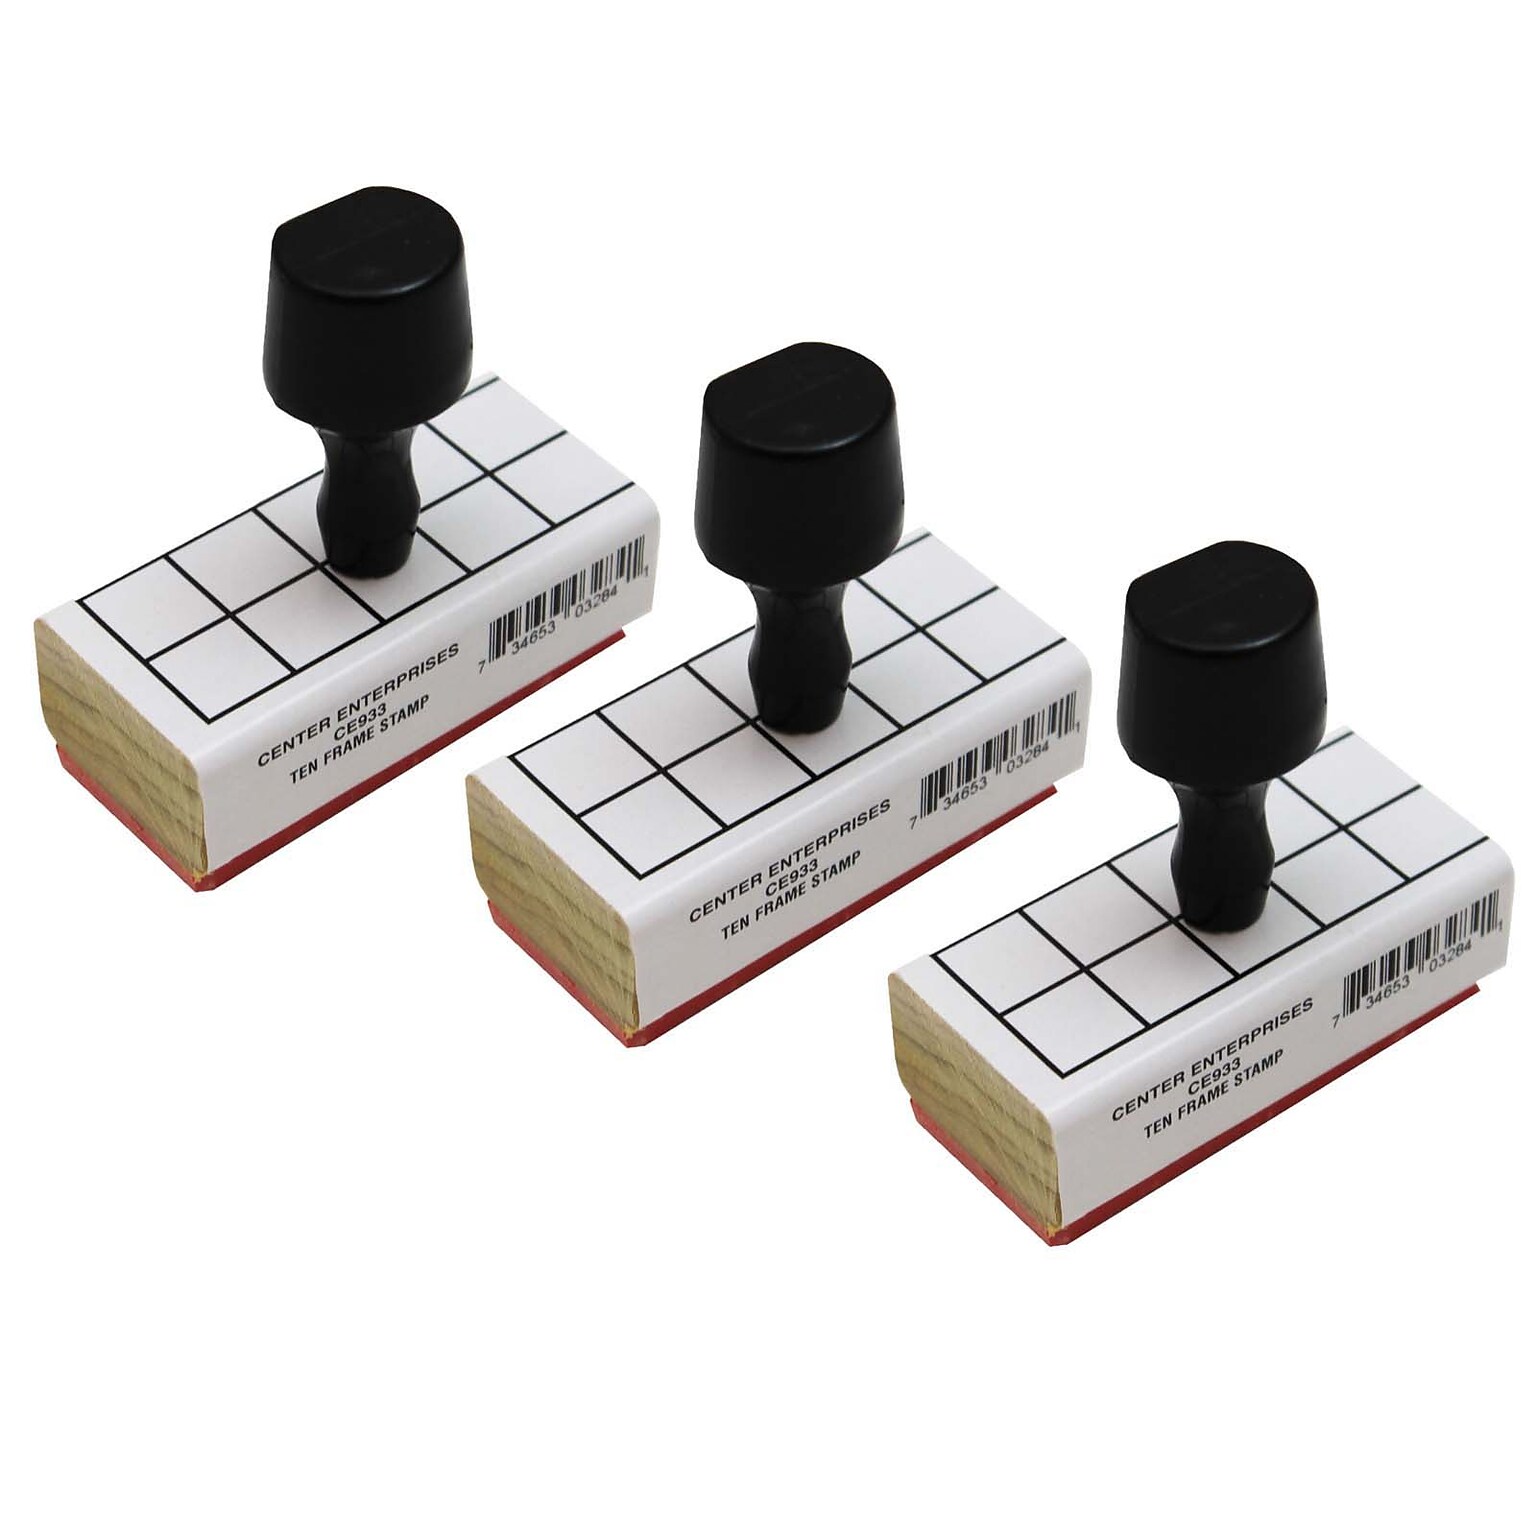 Ready 2 Learn Ten Frame Stamp, Pack of 3 (CE-933-3)